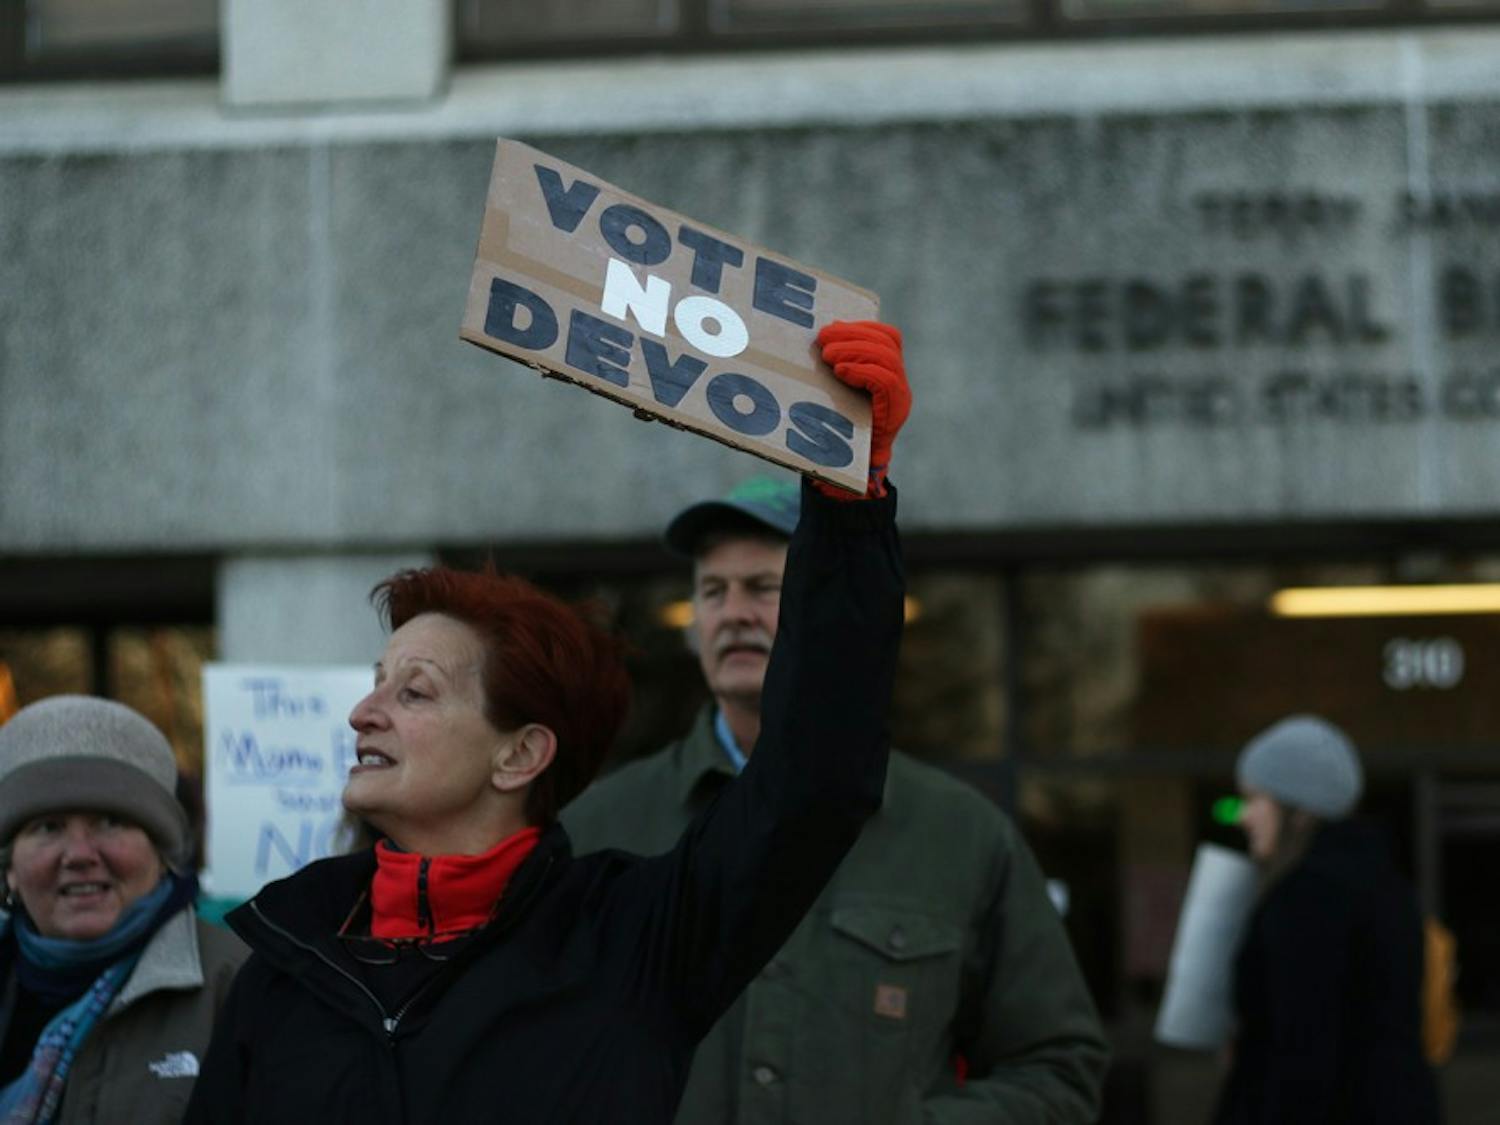 Michele Cox from Newton Grove, NC stands in front of the Federal Courthouse Building to ask Senator Tillis to vote no to Betsy DeVos.